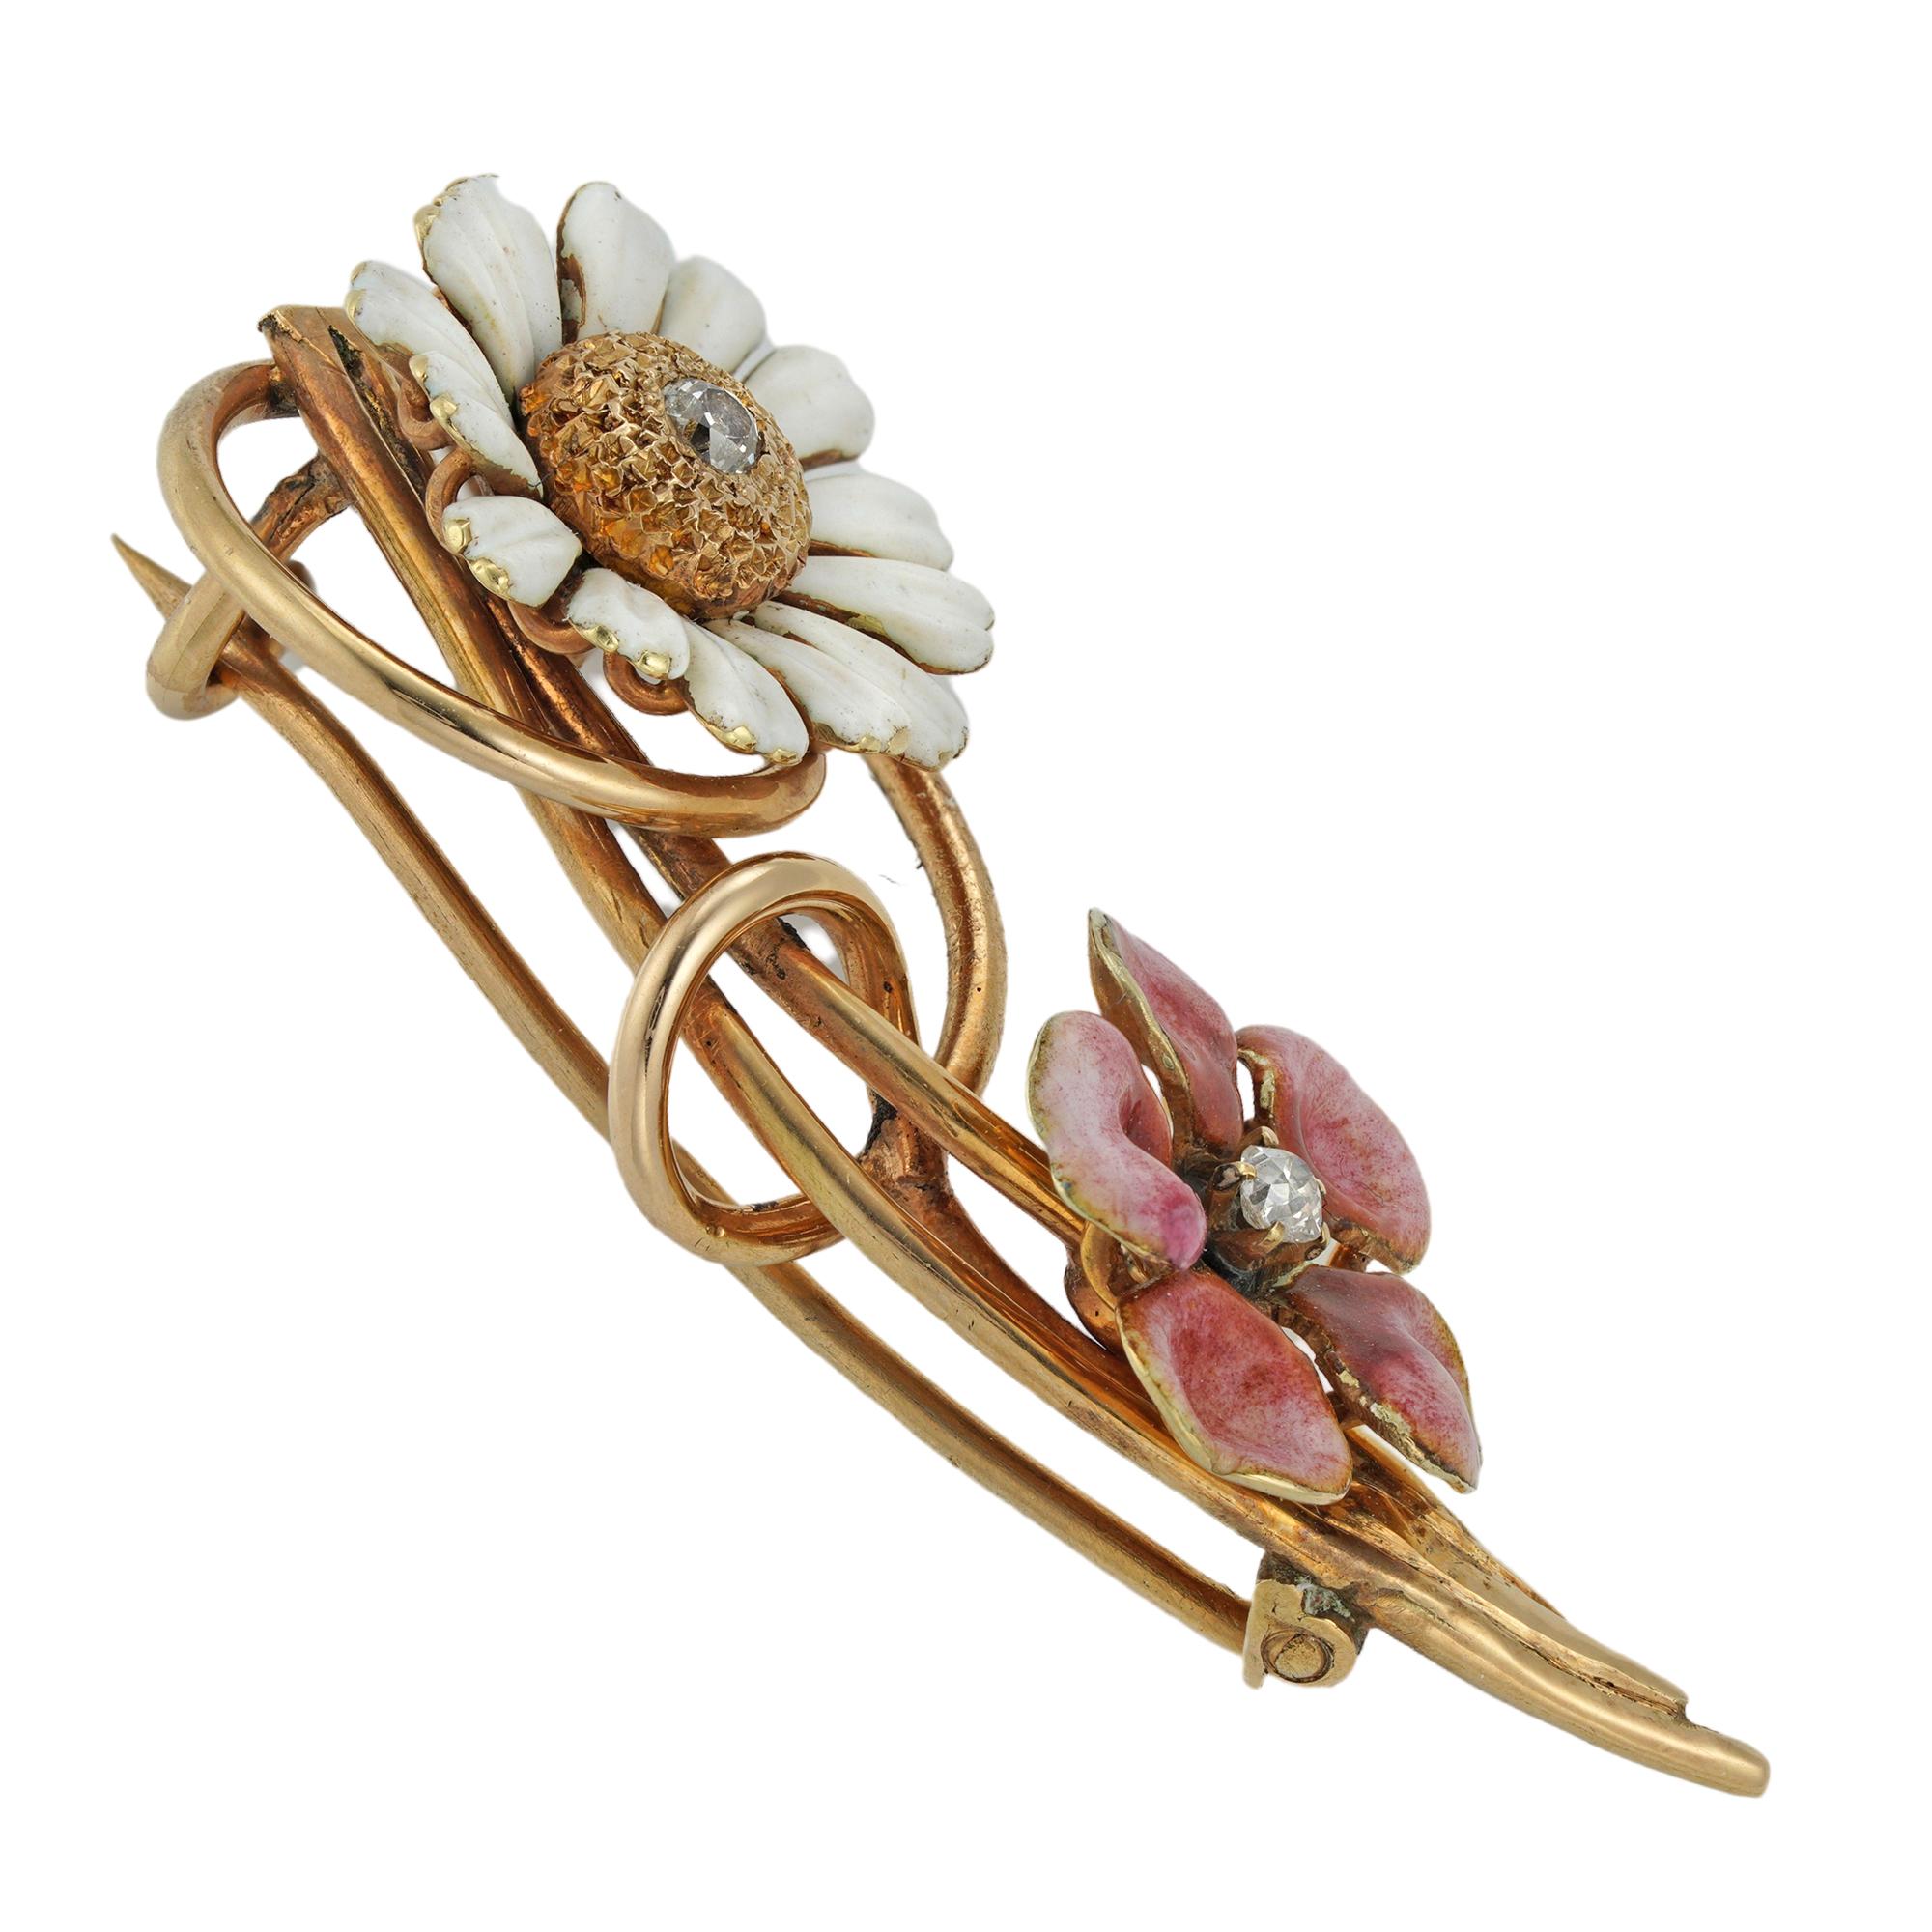 An Edwardian enamel flower brooch, in the form of a spray with a finely enamelled  English Daisy and a Virginia Rose, each centrally-set with an old European-cut diamond estimated to weigh 0.1 carats in total, entwined with gold tendril decorations,